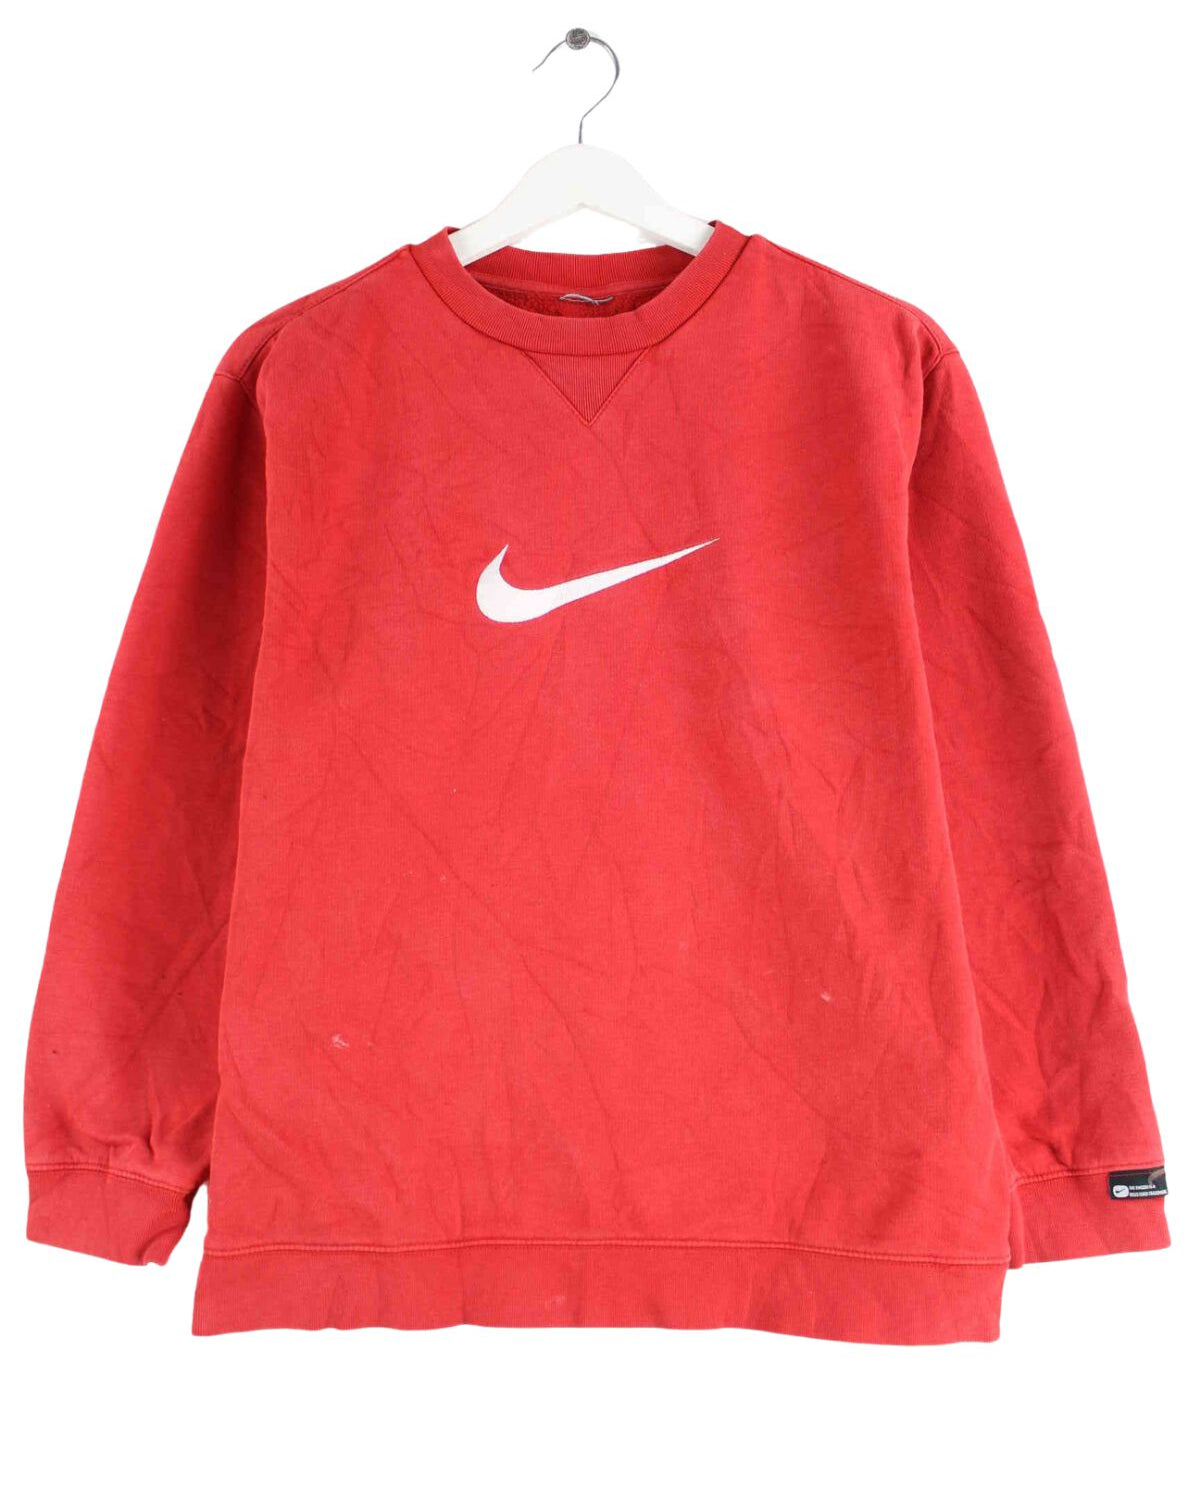 Nike 90s Vintage Big Swoosh Embroidered Sweater Rot S (front image)